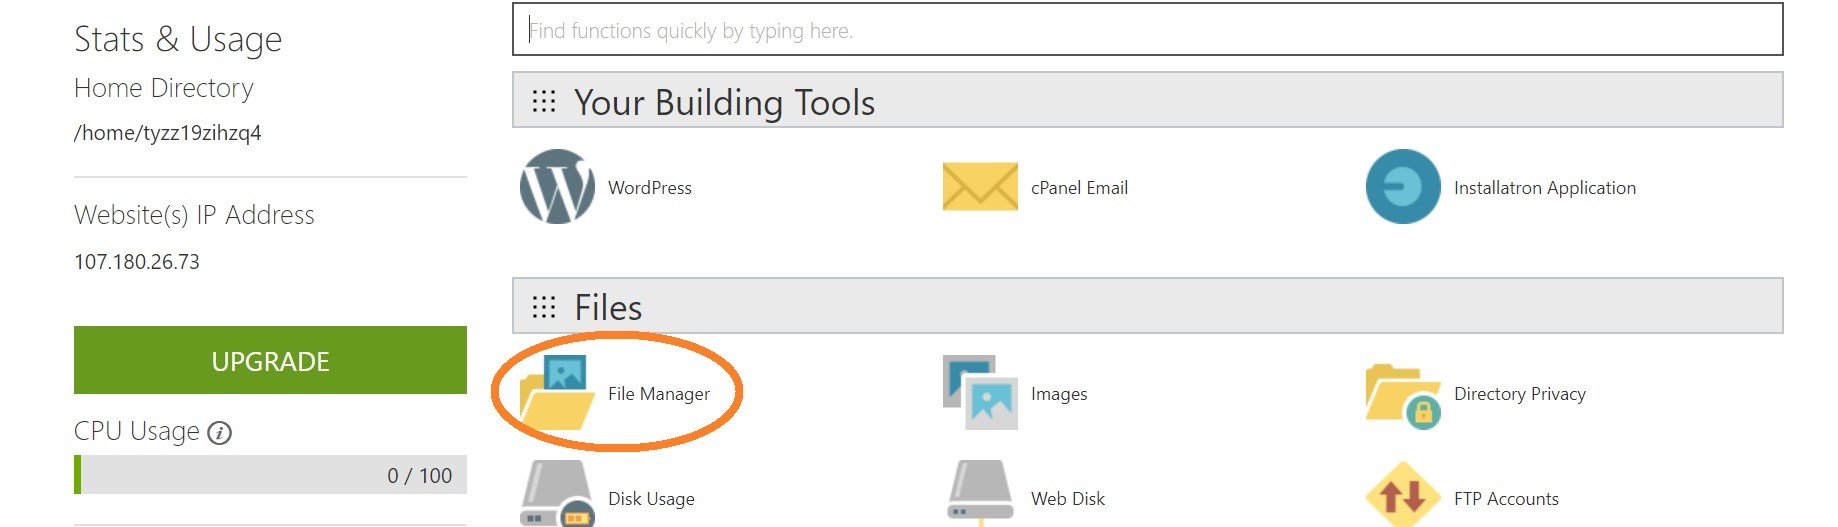 How to fix image upload issues in WordPress 4